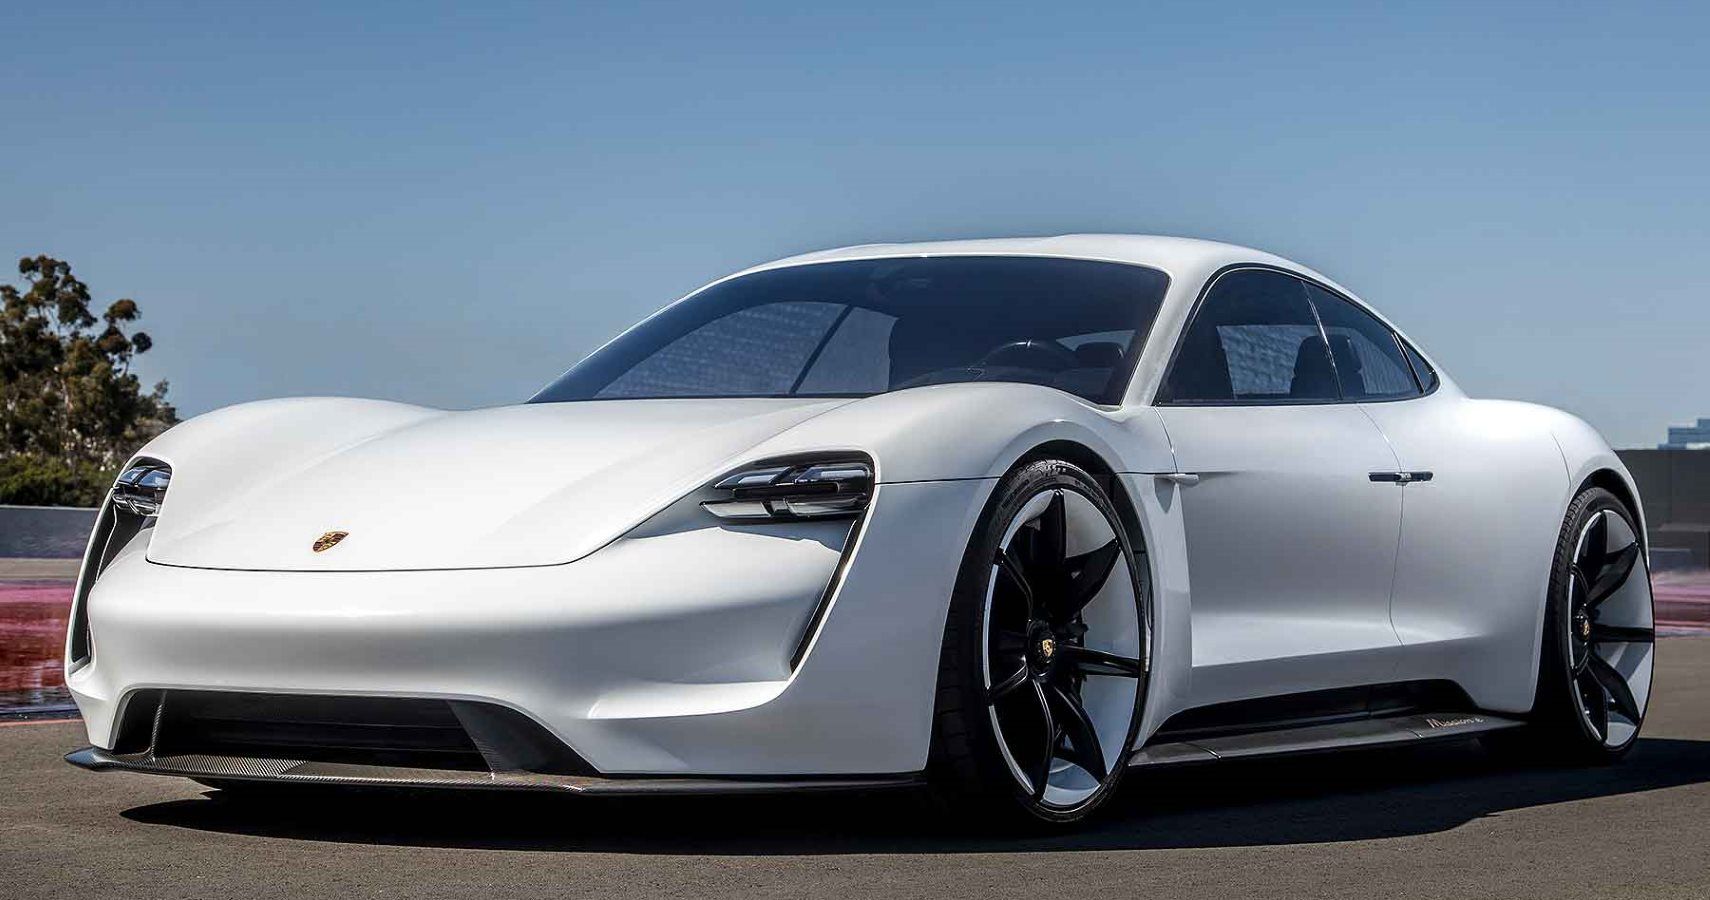 Porsche Is Increasing Production Of The Upcoming Taycan EV Due To Skyrocketing Demand